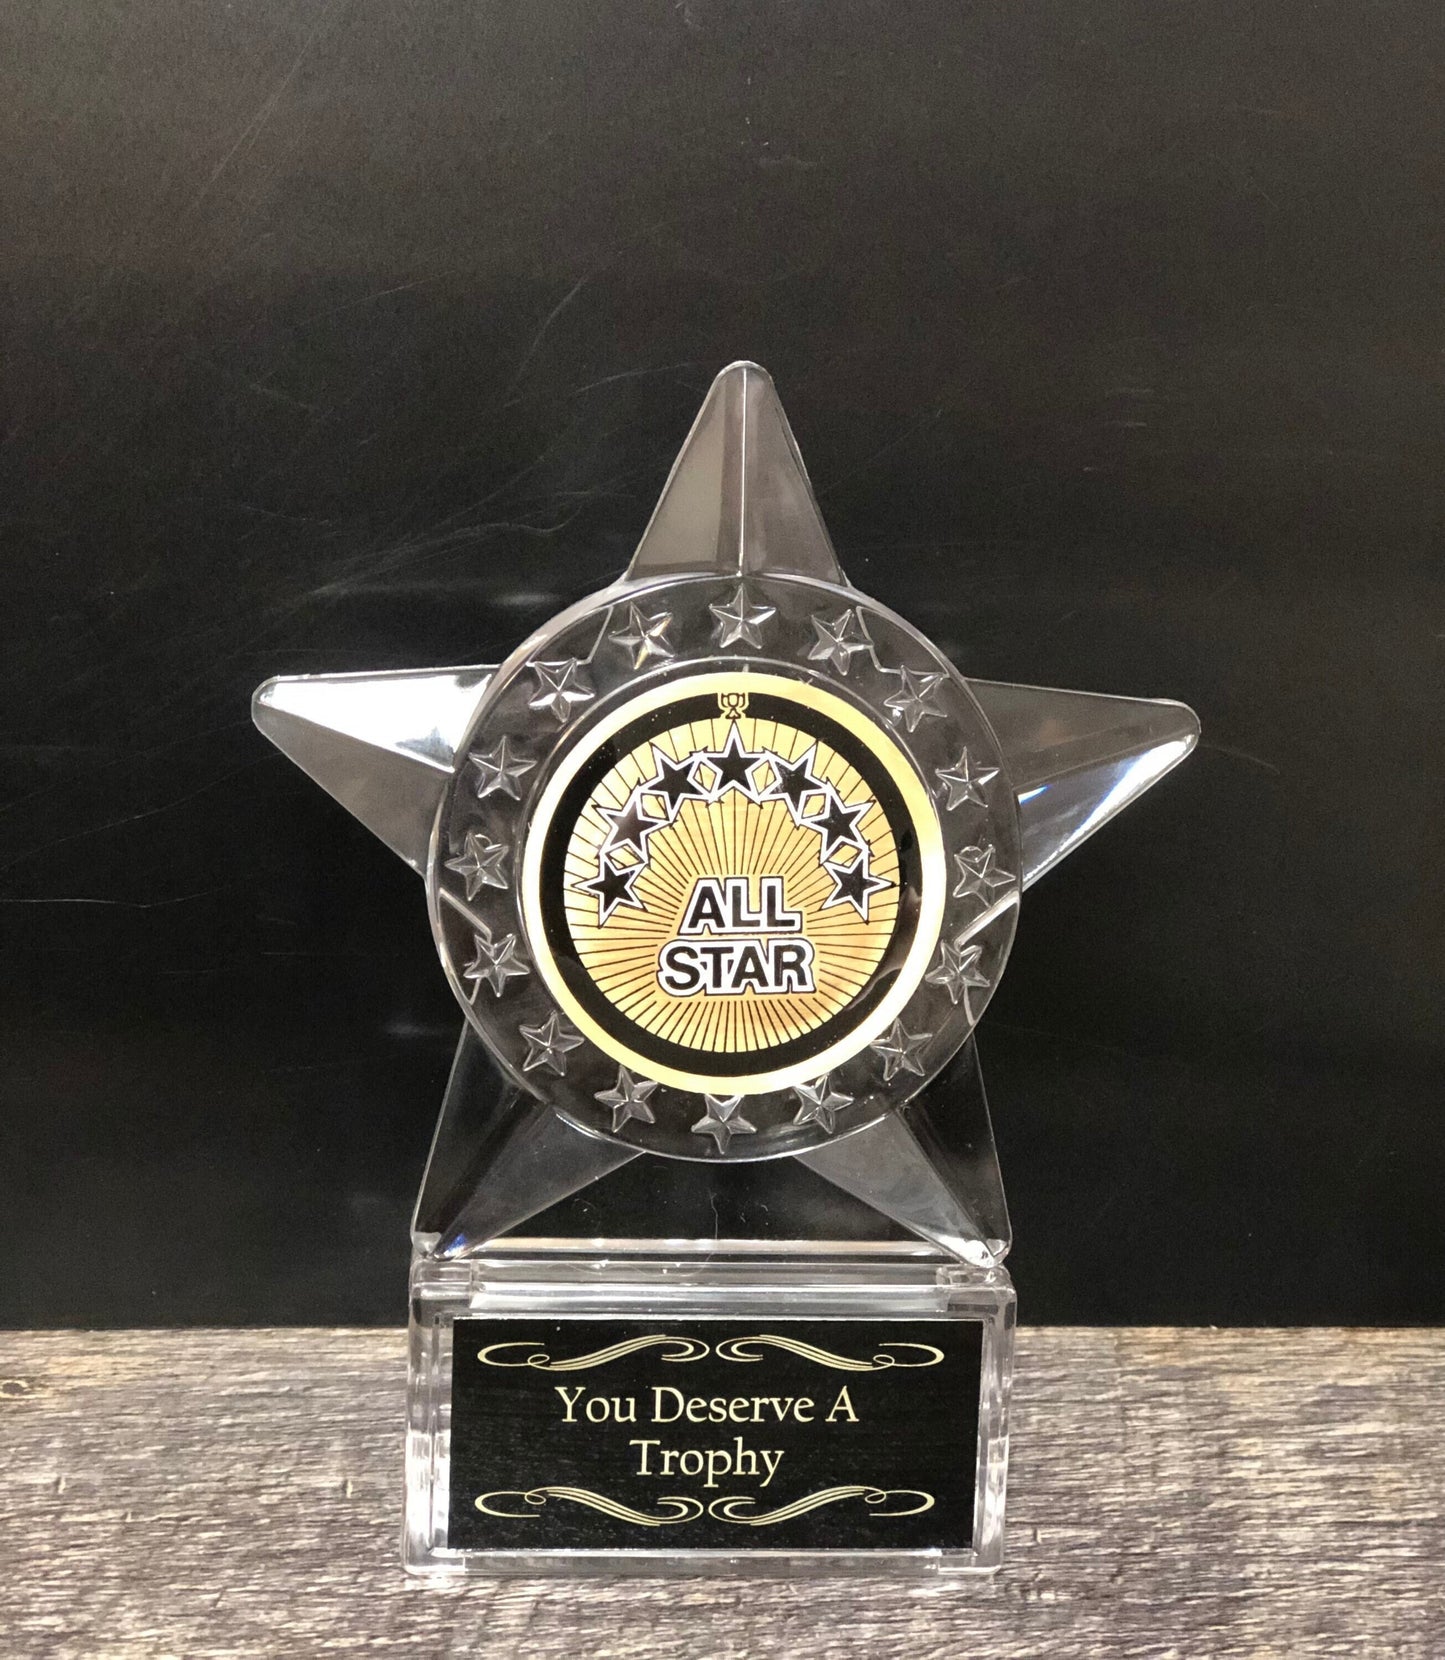 Perfect Attendance Award Mini Star Trophy Personalized You Deserve A Trophy Achievement Award Appreciation Award Employee of the Month